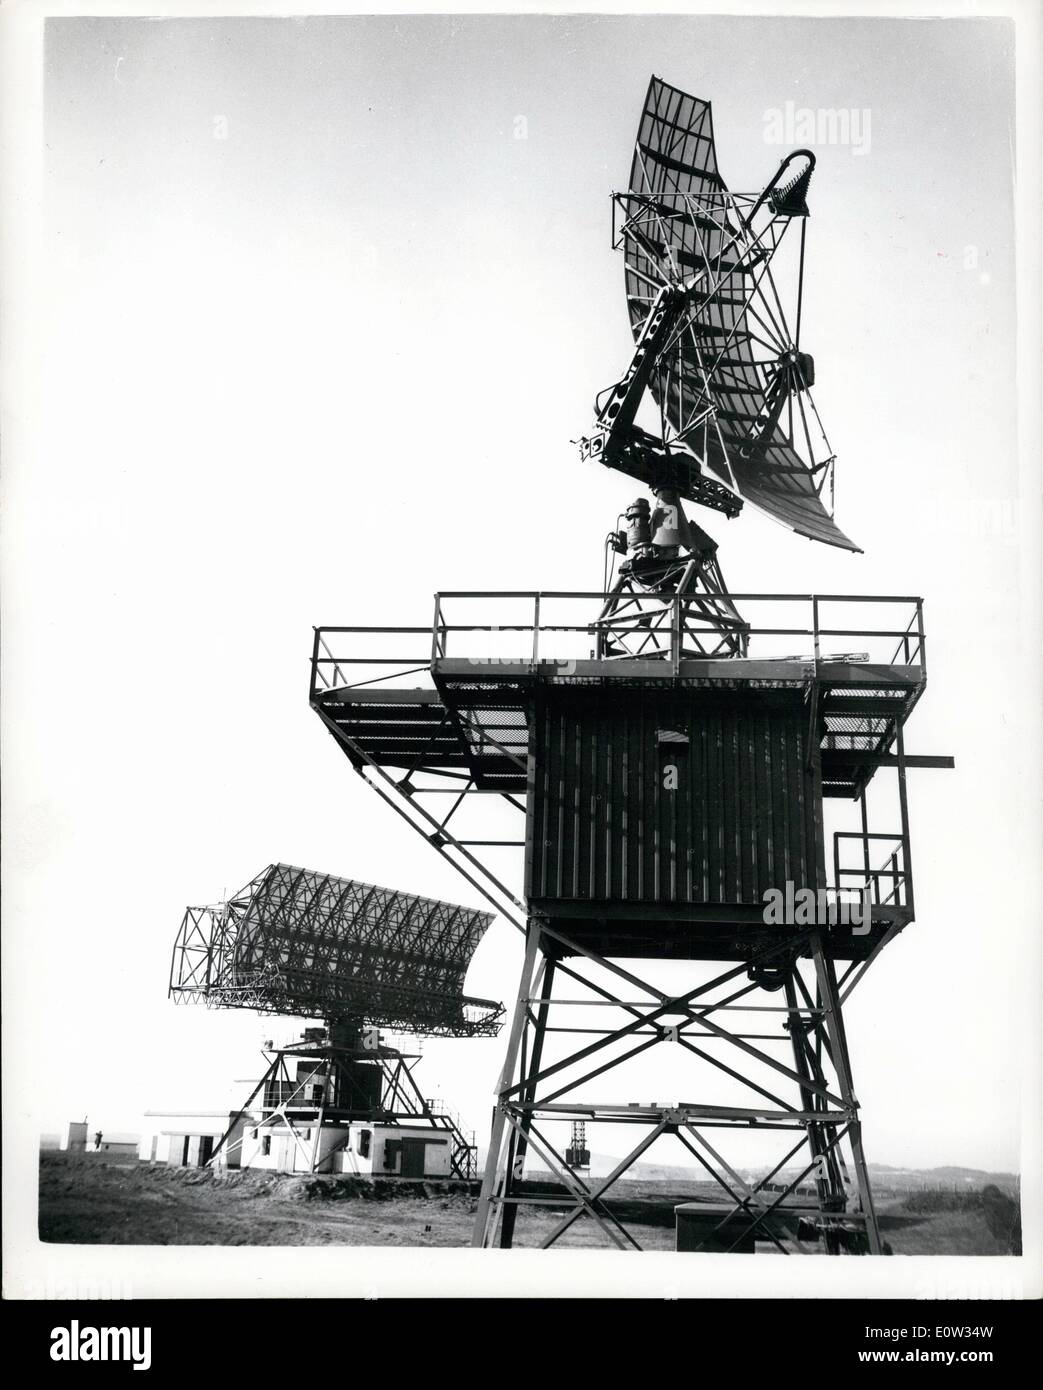 Mar. 03, 1961 - Demonstration Of New Co-Ordinated Air Traffic Control System - At County Down: A demonstration was held yesterday at Bishop's court, county down of the Air Traffic Control Radar Unit - which is one of a number of centres under Joint Air Ministry - Ministry of Aviation control and provides control service to military and civil aircraft in the Upper Air Space (above 25,000 ft).. Stock Photo